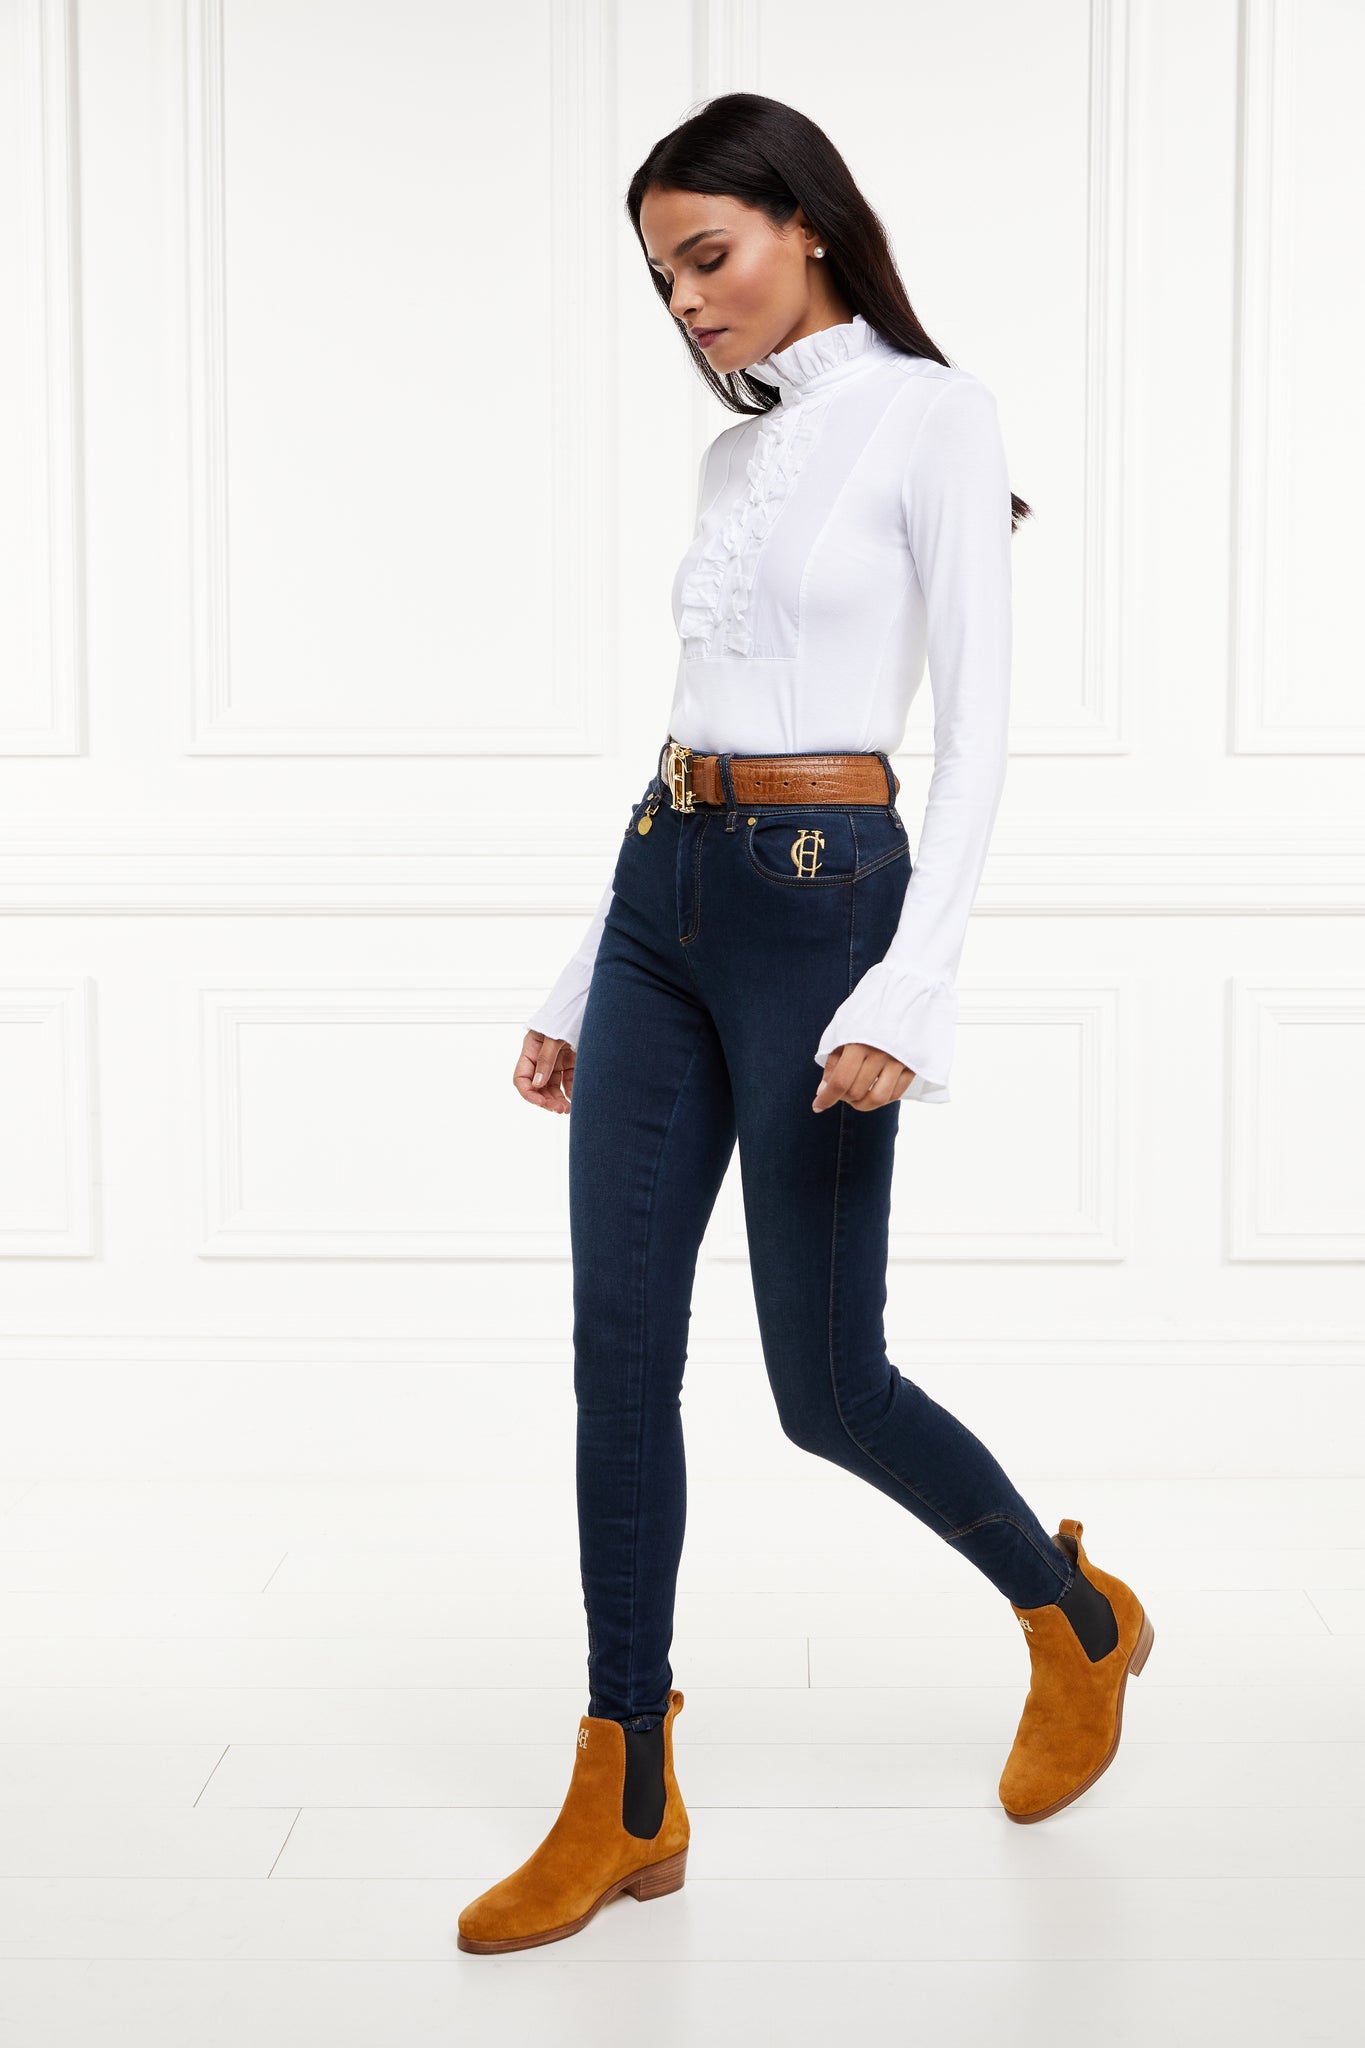 a neatly fitted white long sleeve top with ruffled neckline and cuffs with frilly chest detail